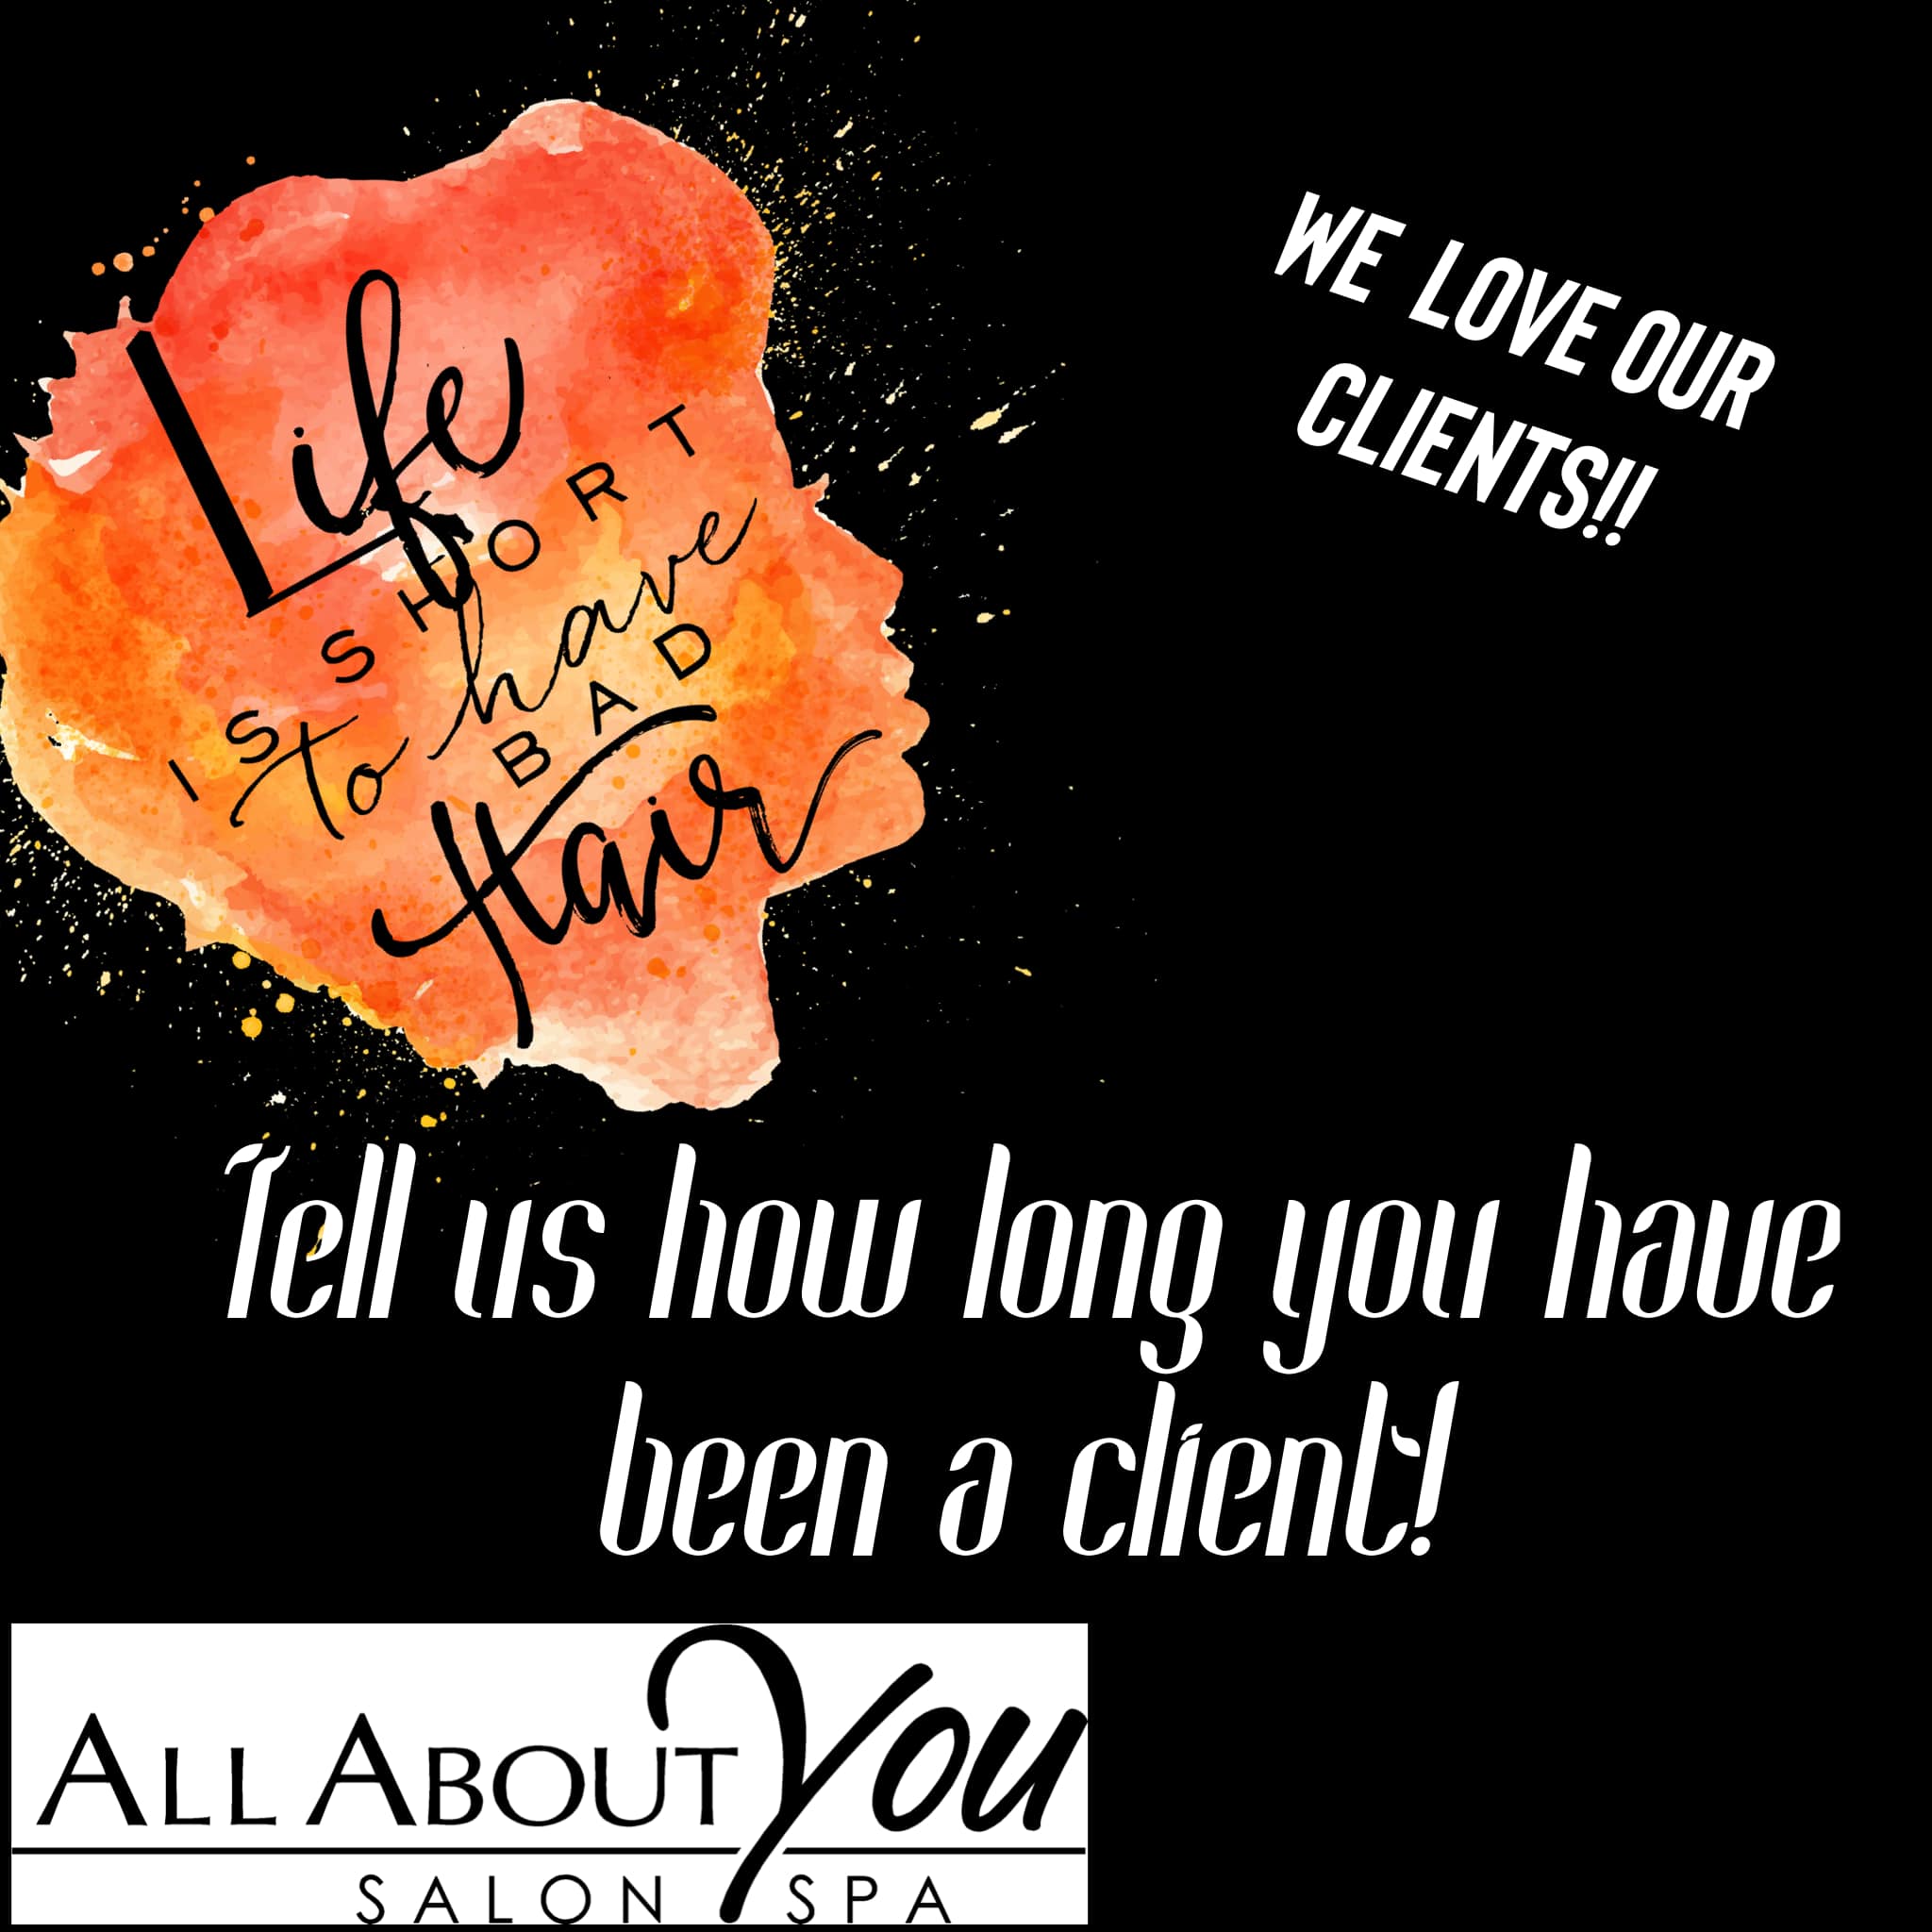 All About You Salon & Spa 2670 E Main St, Reedsburg Wisconsin 53959